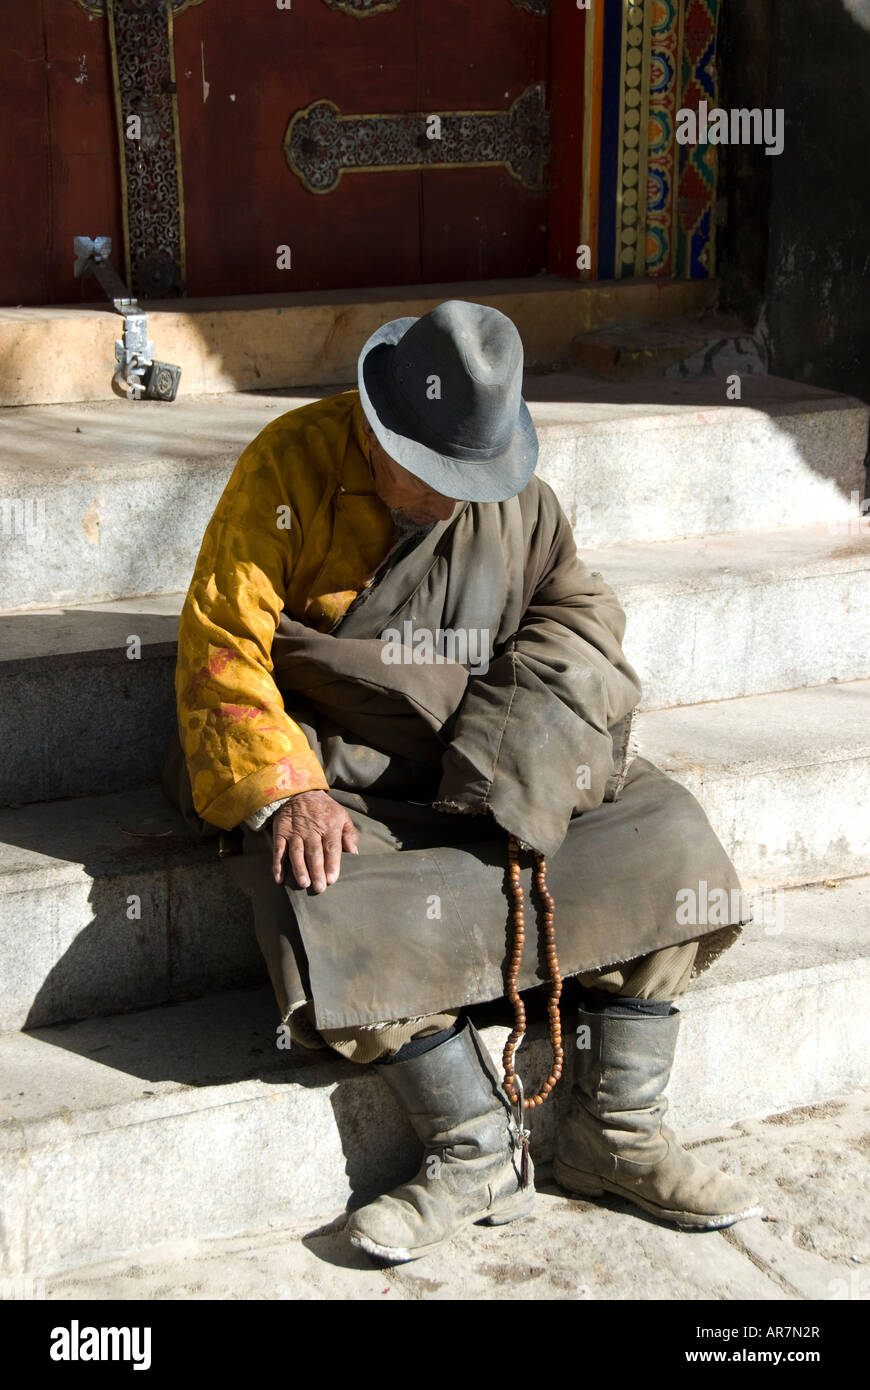 An exhausted Tibetan Pilgrim hangs his head in rest, Lhasa Tibet, The People’s republic of China Stock Photo